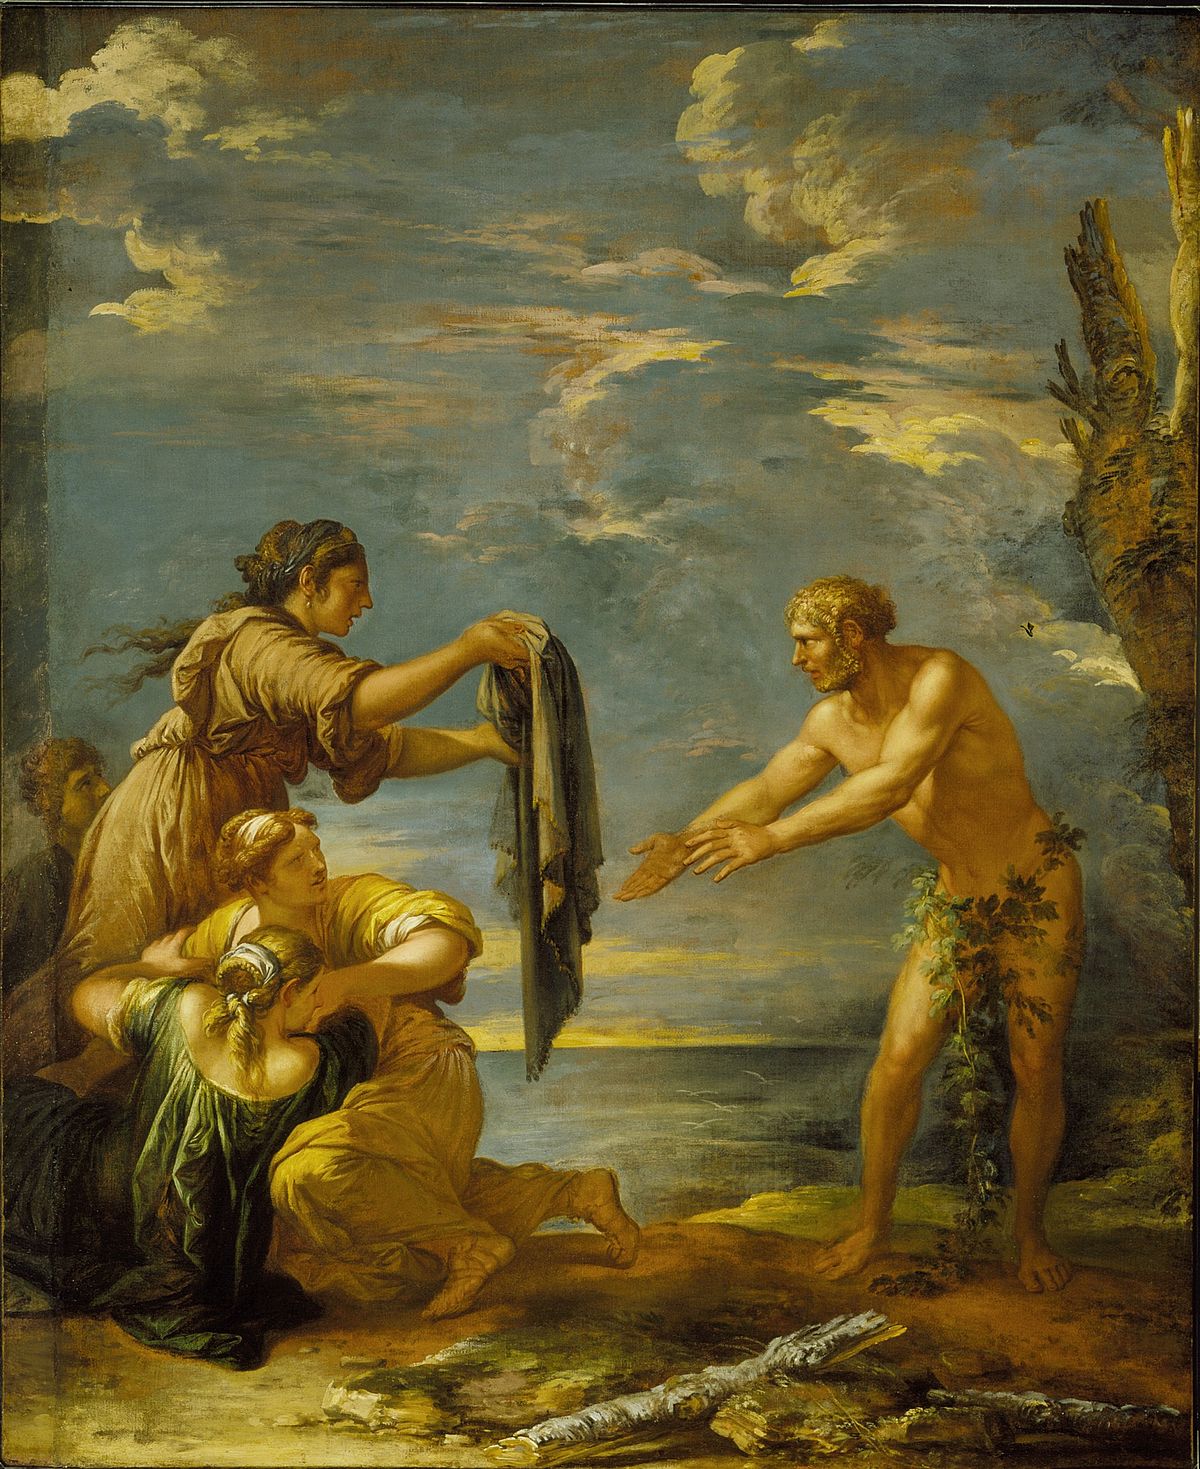 http://upload.wikimedia.org/wikipedia/commons/thumb/a/af/Odysseus_and_Nausicaa_LACMA_49.17.4.jpg/1200px-Odysseus_and_Nausicaa_LACMA_49.17.4.jpg